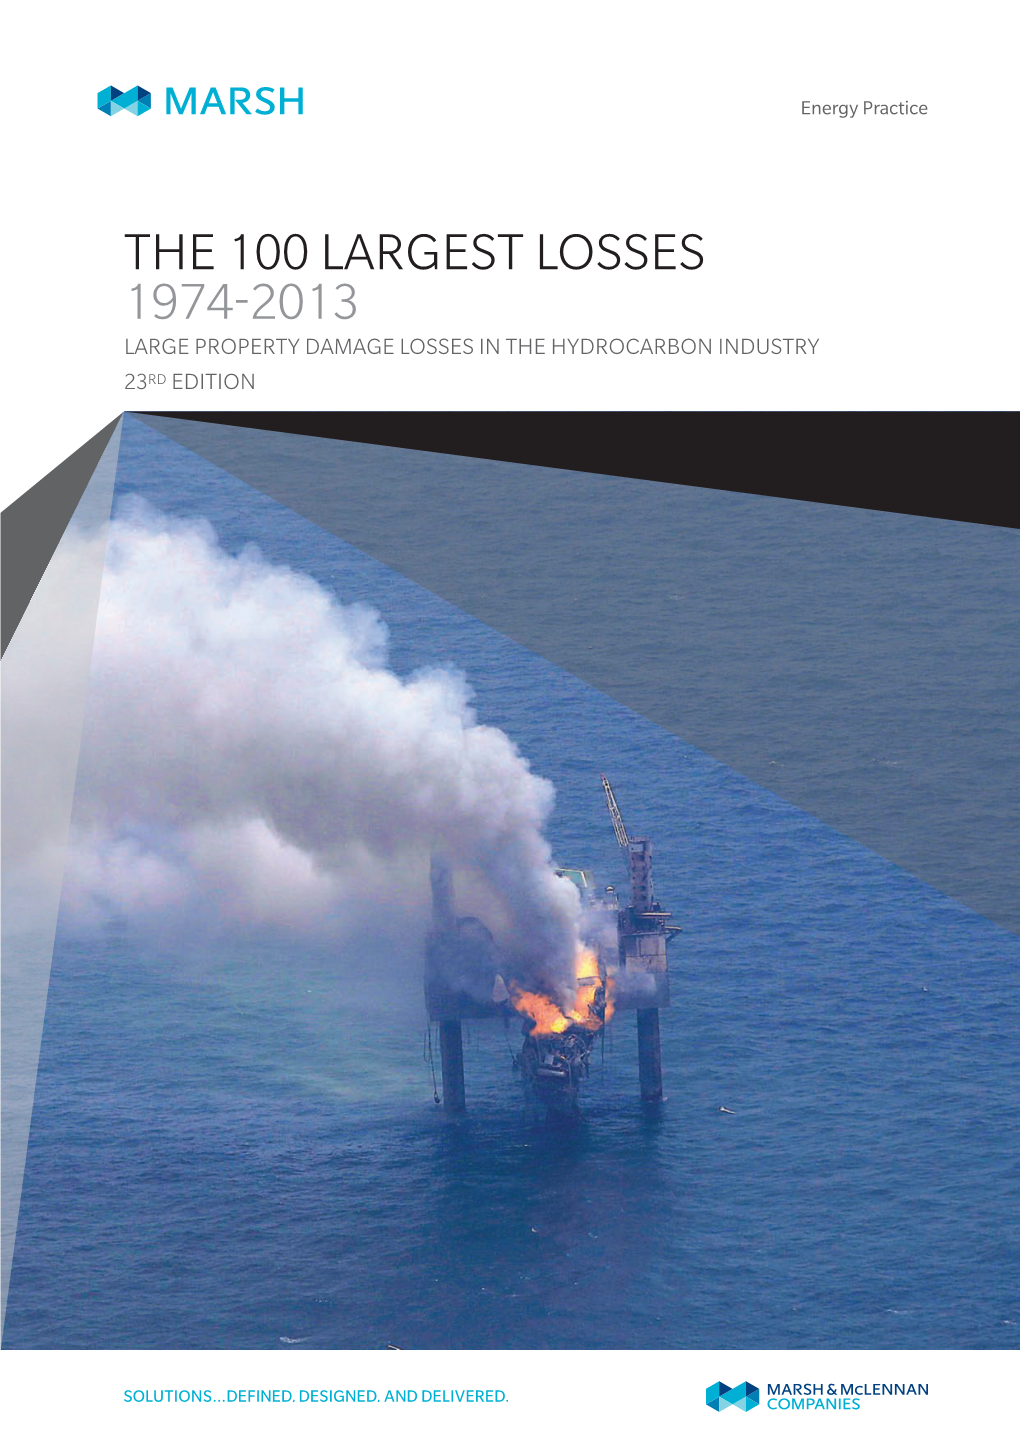 100 Largest Losses 23Rd Edition 2014